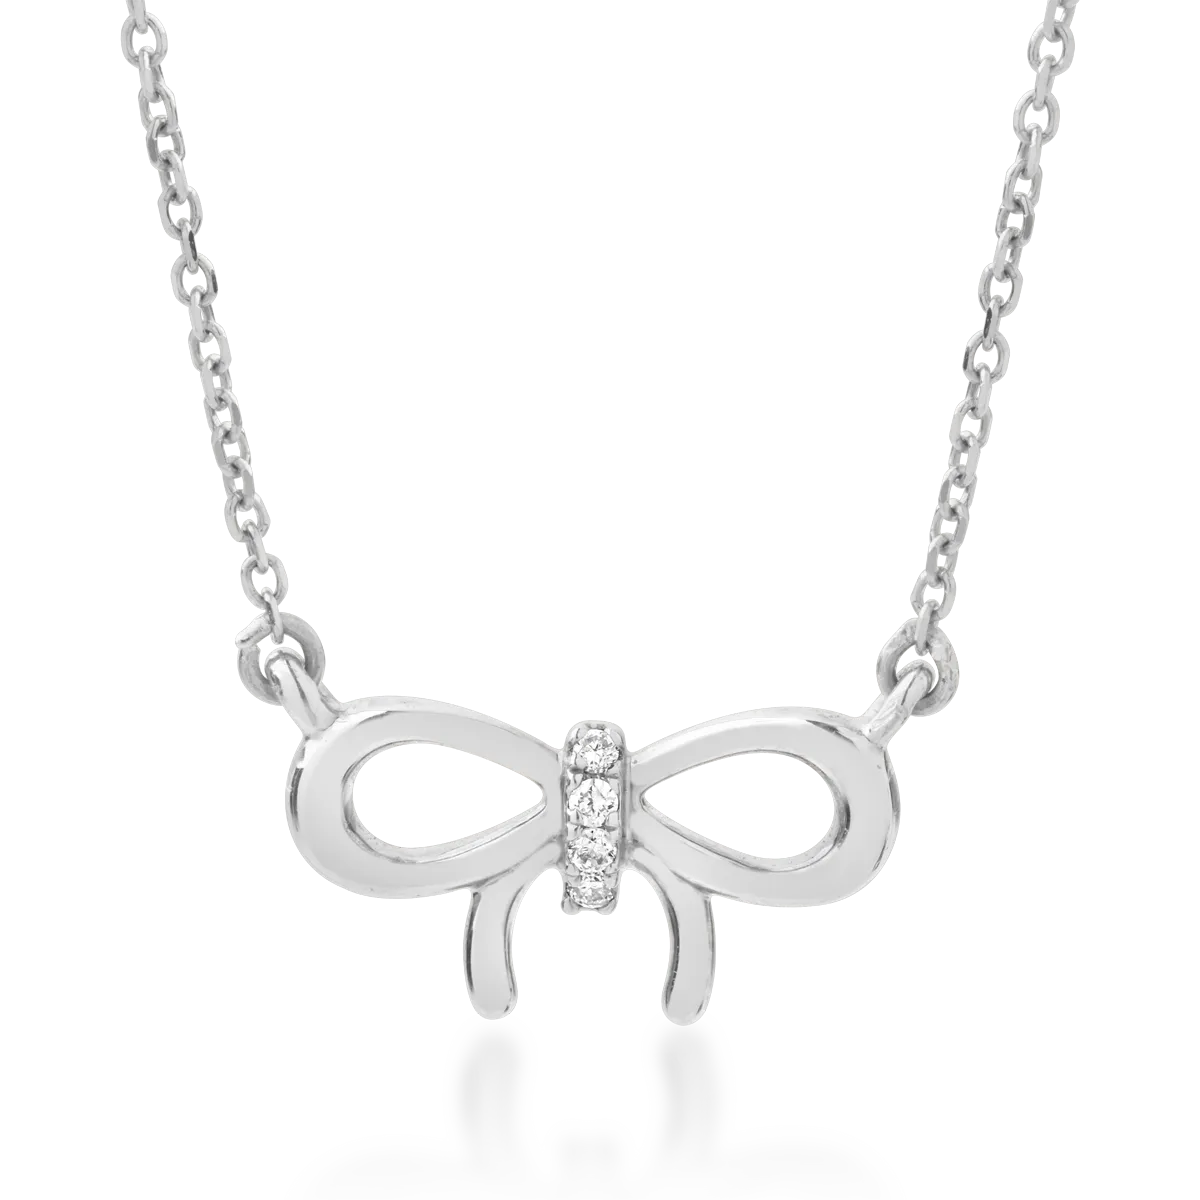 18K white gold knot pendant necklace with 0.01ct diamonds